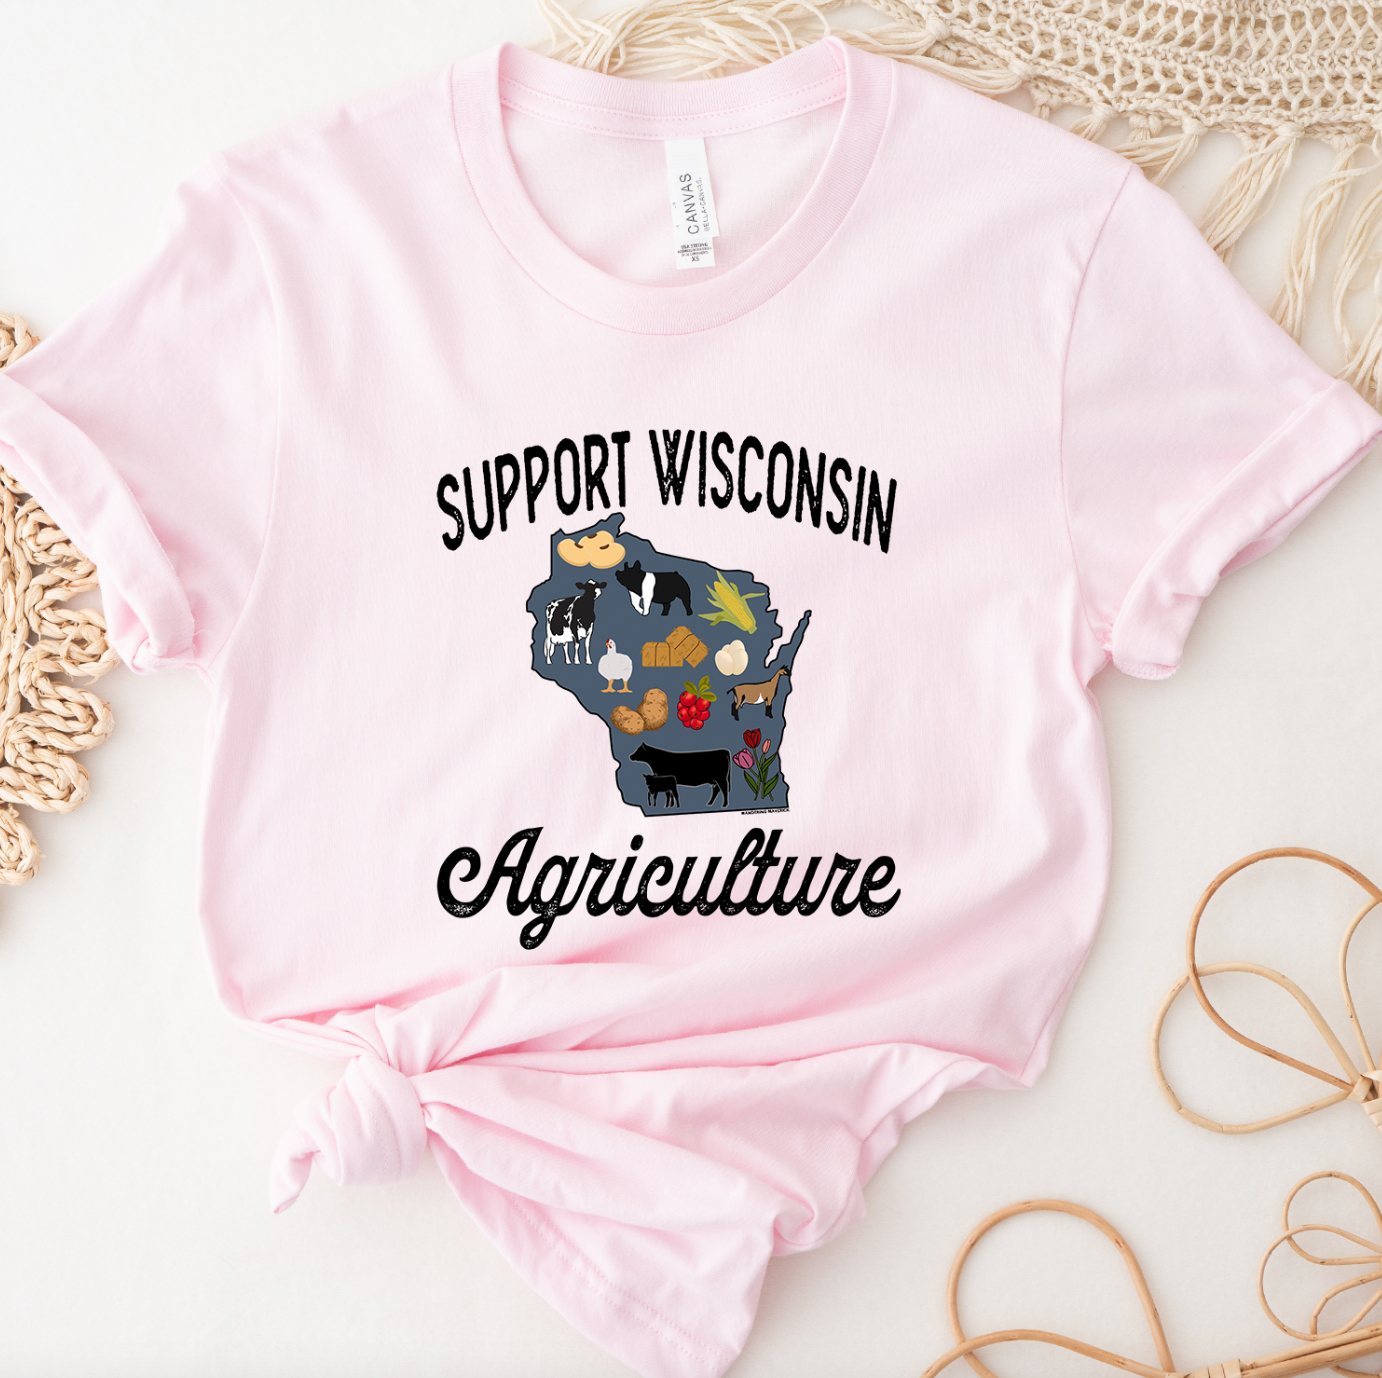 Support Wisconsin Agriculture T-Shirt (XS-4XL) - Multiple Colors!